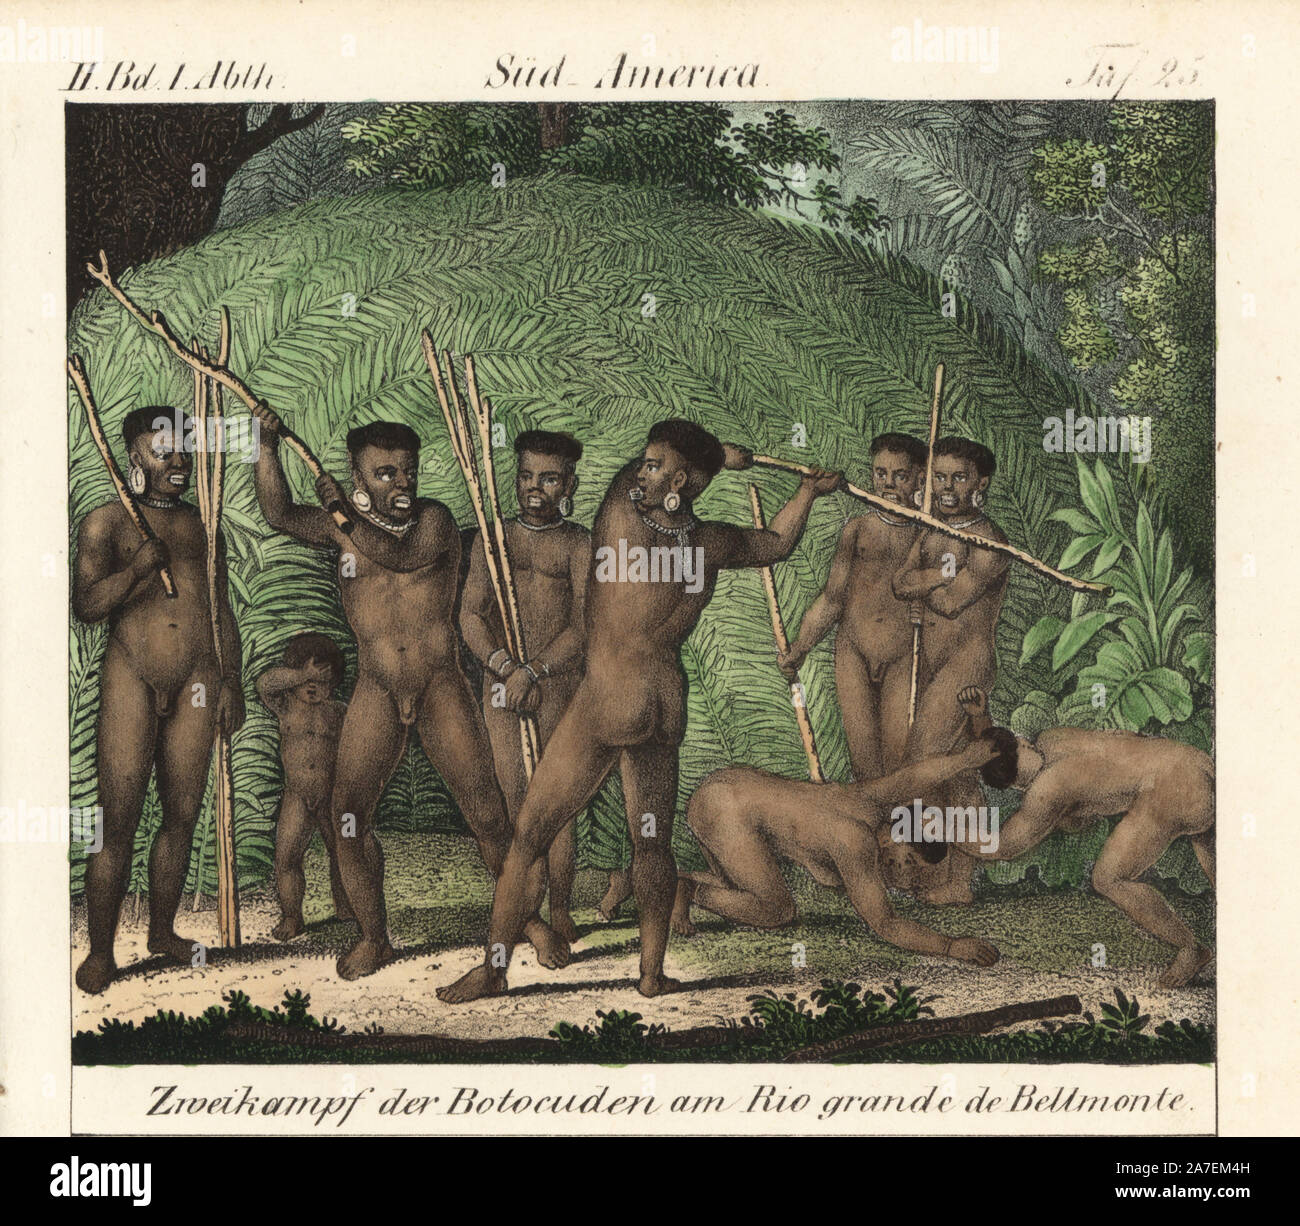 Territorial duels between Botocudo tribesmen including wrestling and stick fighting to decide hunting ground violation. River Belmonte, Bahia, Brazil, South America. Illustration from Maximilian von Wied-Neuwied's 'Travels in Brazil, 1815-1817.' Handcoloured lithograph from Friedrich Wilhelm Goedsche's 'Vollstaendige Völkergallerie in getreuen Abbildungen' (Complete Gallery of Peoples in True Pictures), Meissen, circa 1835-1840. Goedsche (1785-1863) was a German writer, bookseller and publisher in Meissen. Stock Photo